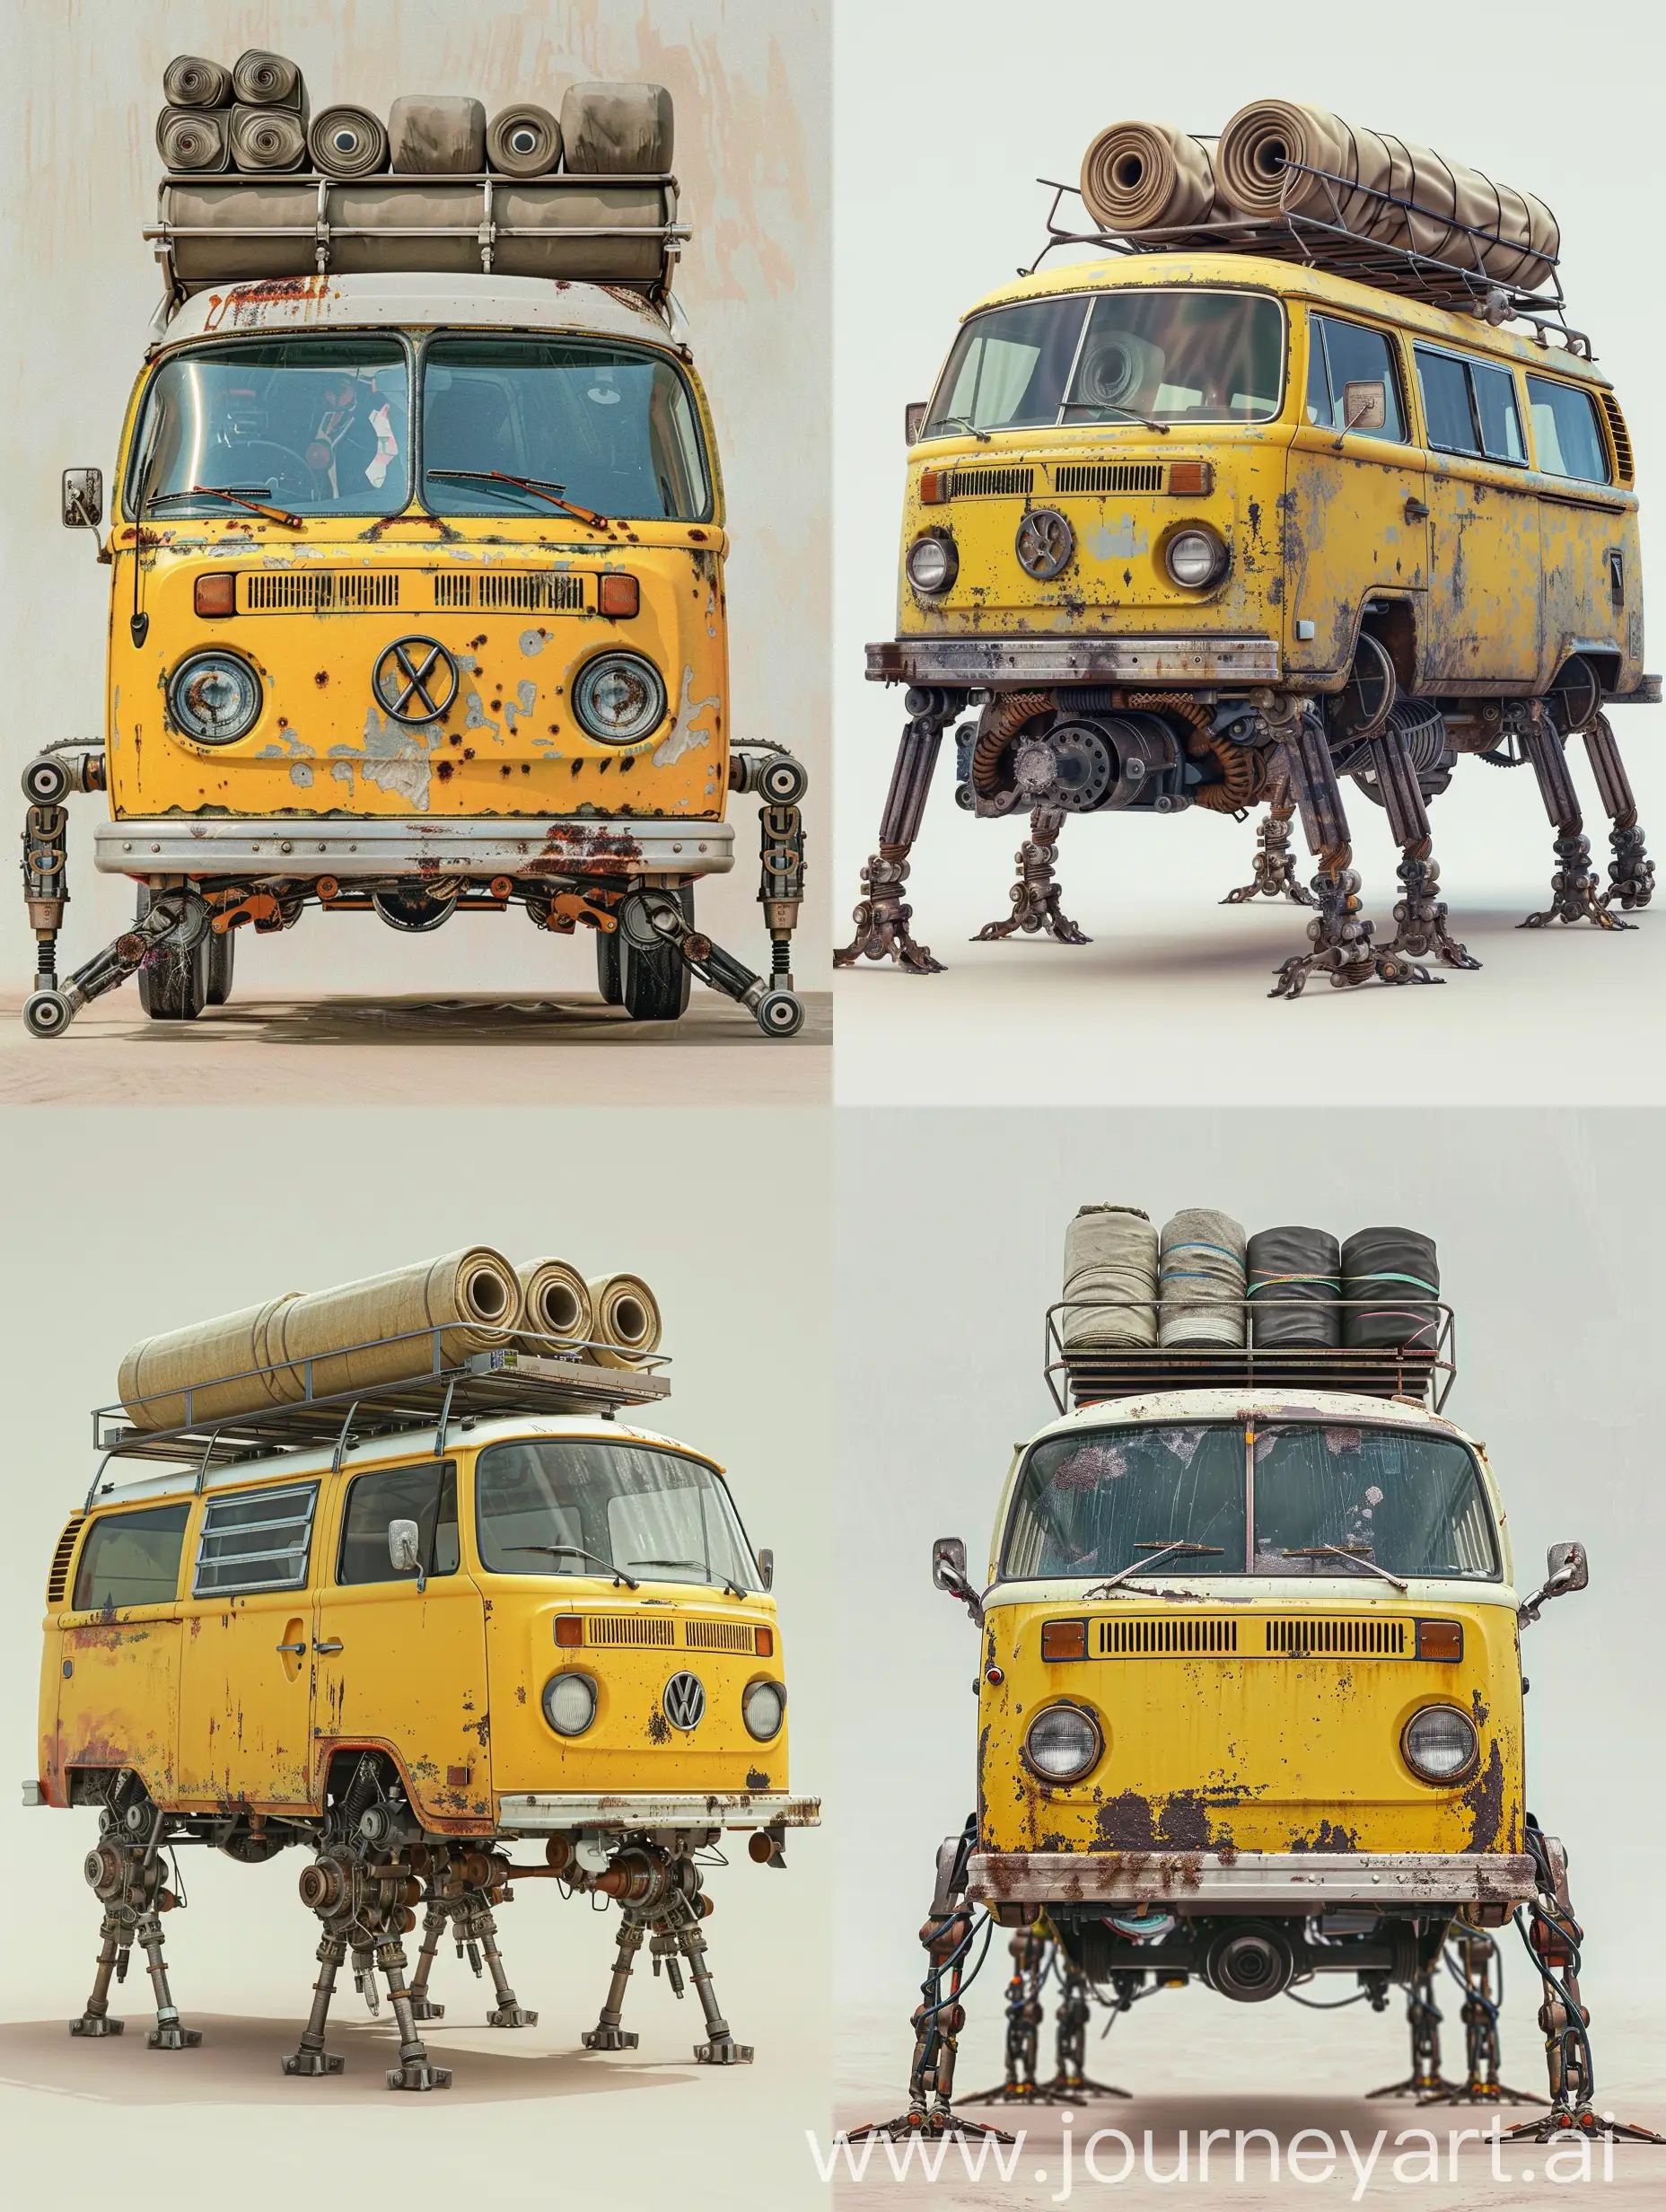 The Van with Mechanical Spider Legs:
At the center of the composition stands a vintage yellow van, its paint faded and weathered by time. The van exudes nostalgia, hinting at countless adventures it might have embarked upon.
The van is no ordinary vehicle; it’s been retrofitted with mechanical spider-like legs. These legs are a fusion of steampunk aesthetics and futuristic engineering. They appear sturdy, each joint articulated with gears, pistons, and cables.
The legs elevate the van above the ground, granting it mobility across various terrains. Perhaps this hybrid creation is a testament to human ingenuity, blending the old and the new.
Roof Racks and Rolled-Up Materials:
Mounted on the van’s roof are roof racks, their metal frames supporting tightly rolled-up materials. These could be anything from tents to sleeping bags, suggesting that the van’s occupants are prepared for extended journeys.
The rolled-up items evoke a sense of adventure and self-sufficiency. They imply that the van’s travelers are explorers, ready to camp under the open sky or venture into uncharted territories.